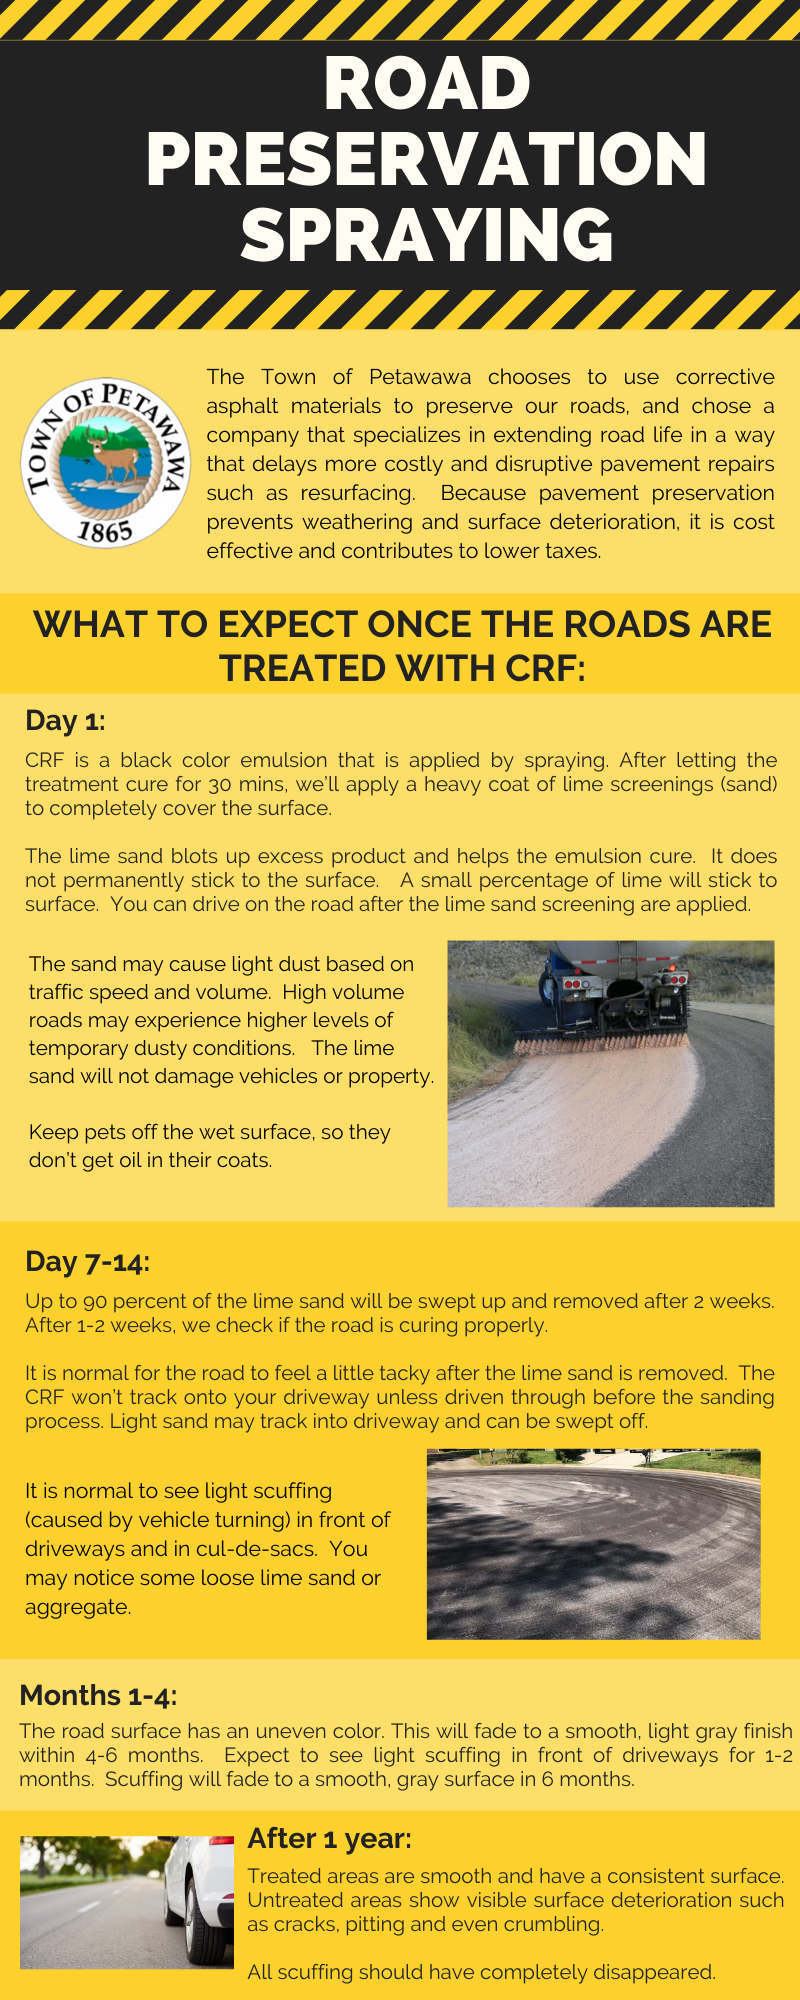 Road Preservation Graphic with details